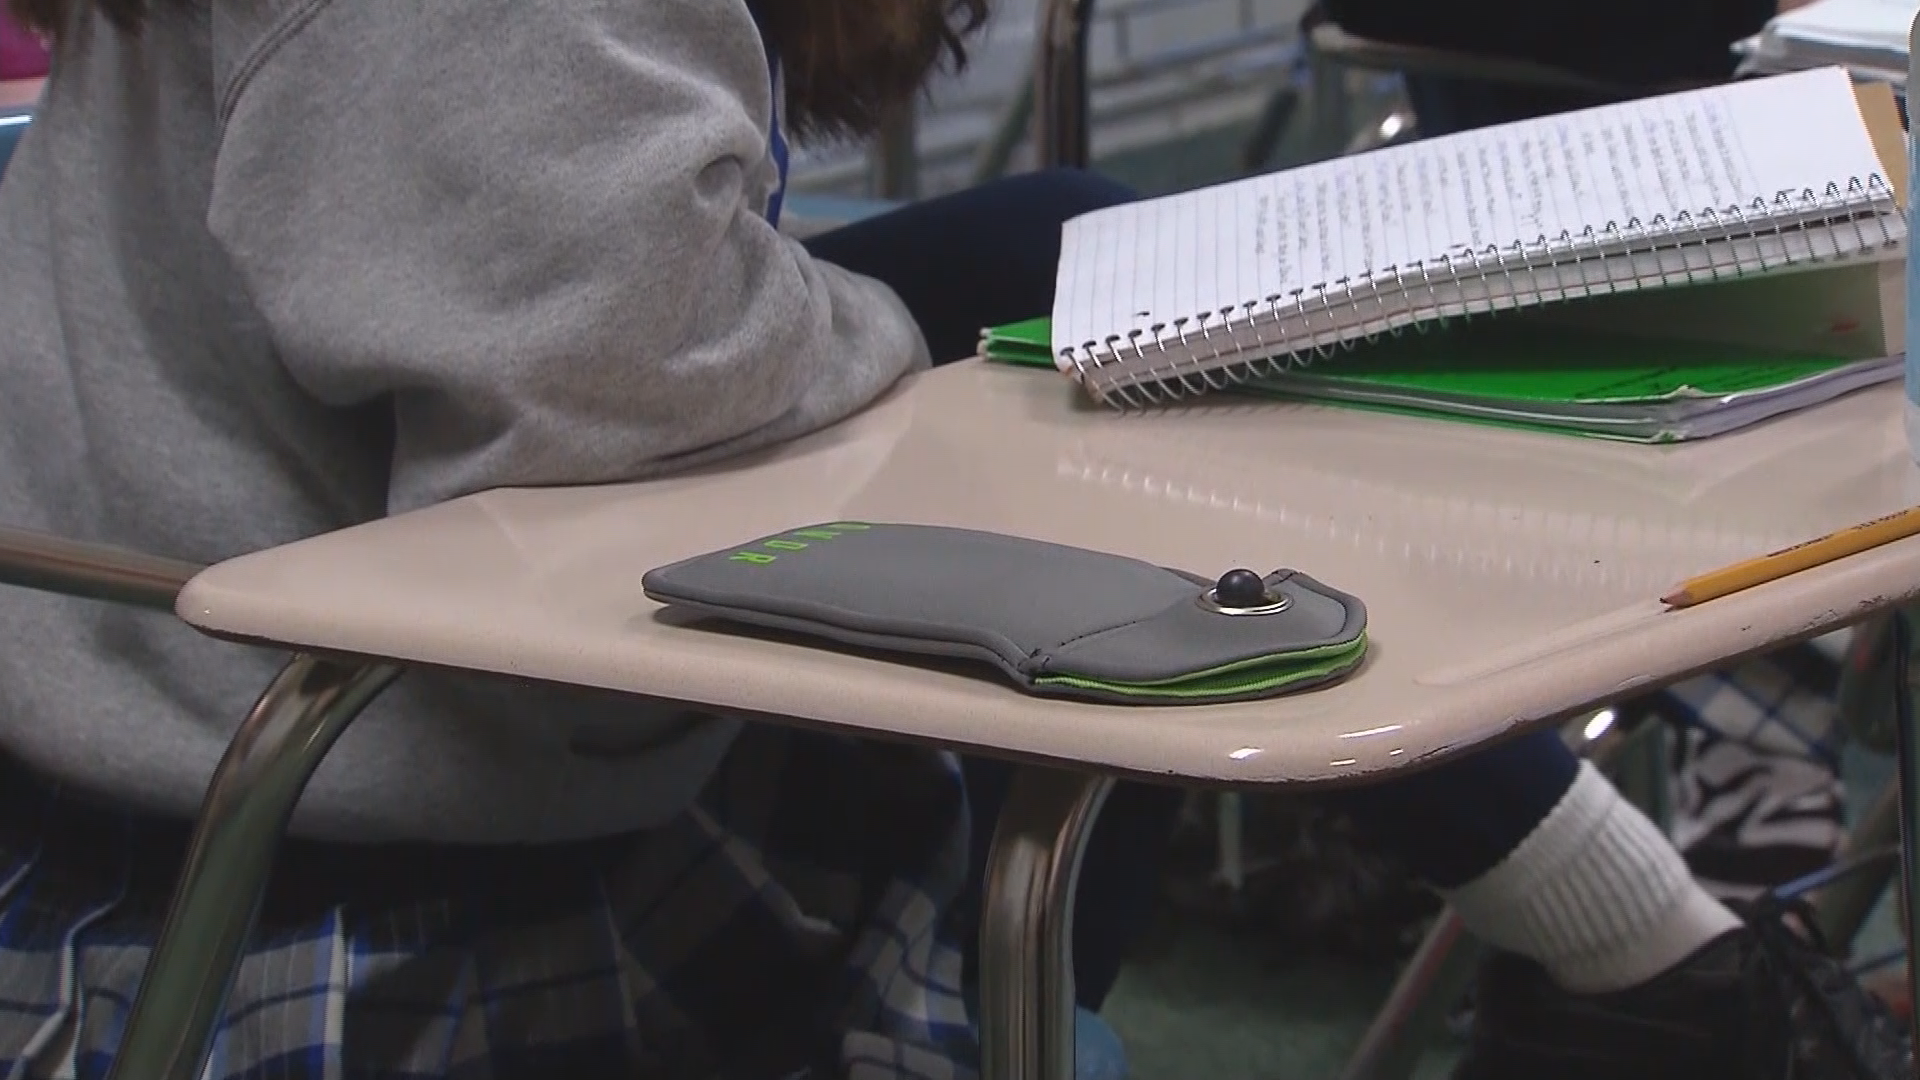 Woodville ISD limits cell phone use with Yondr pouches